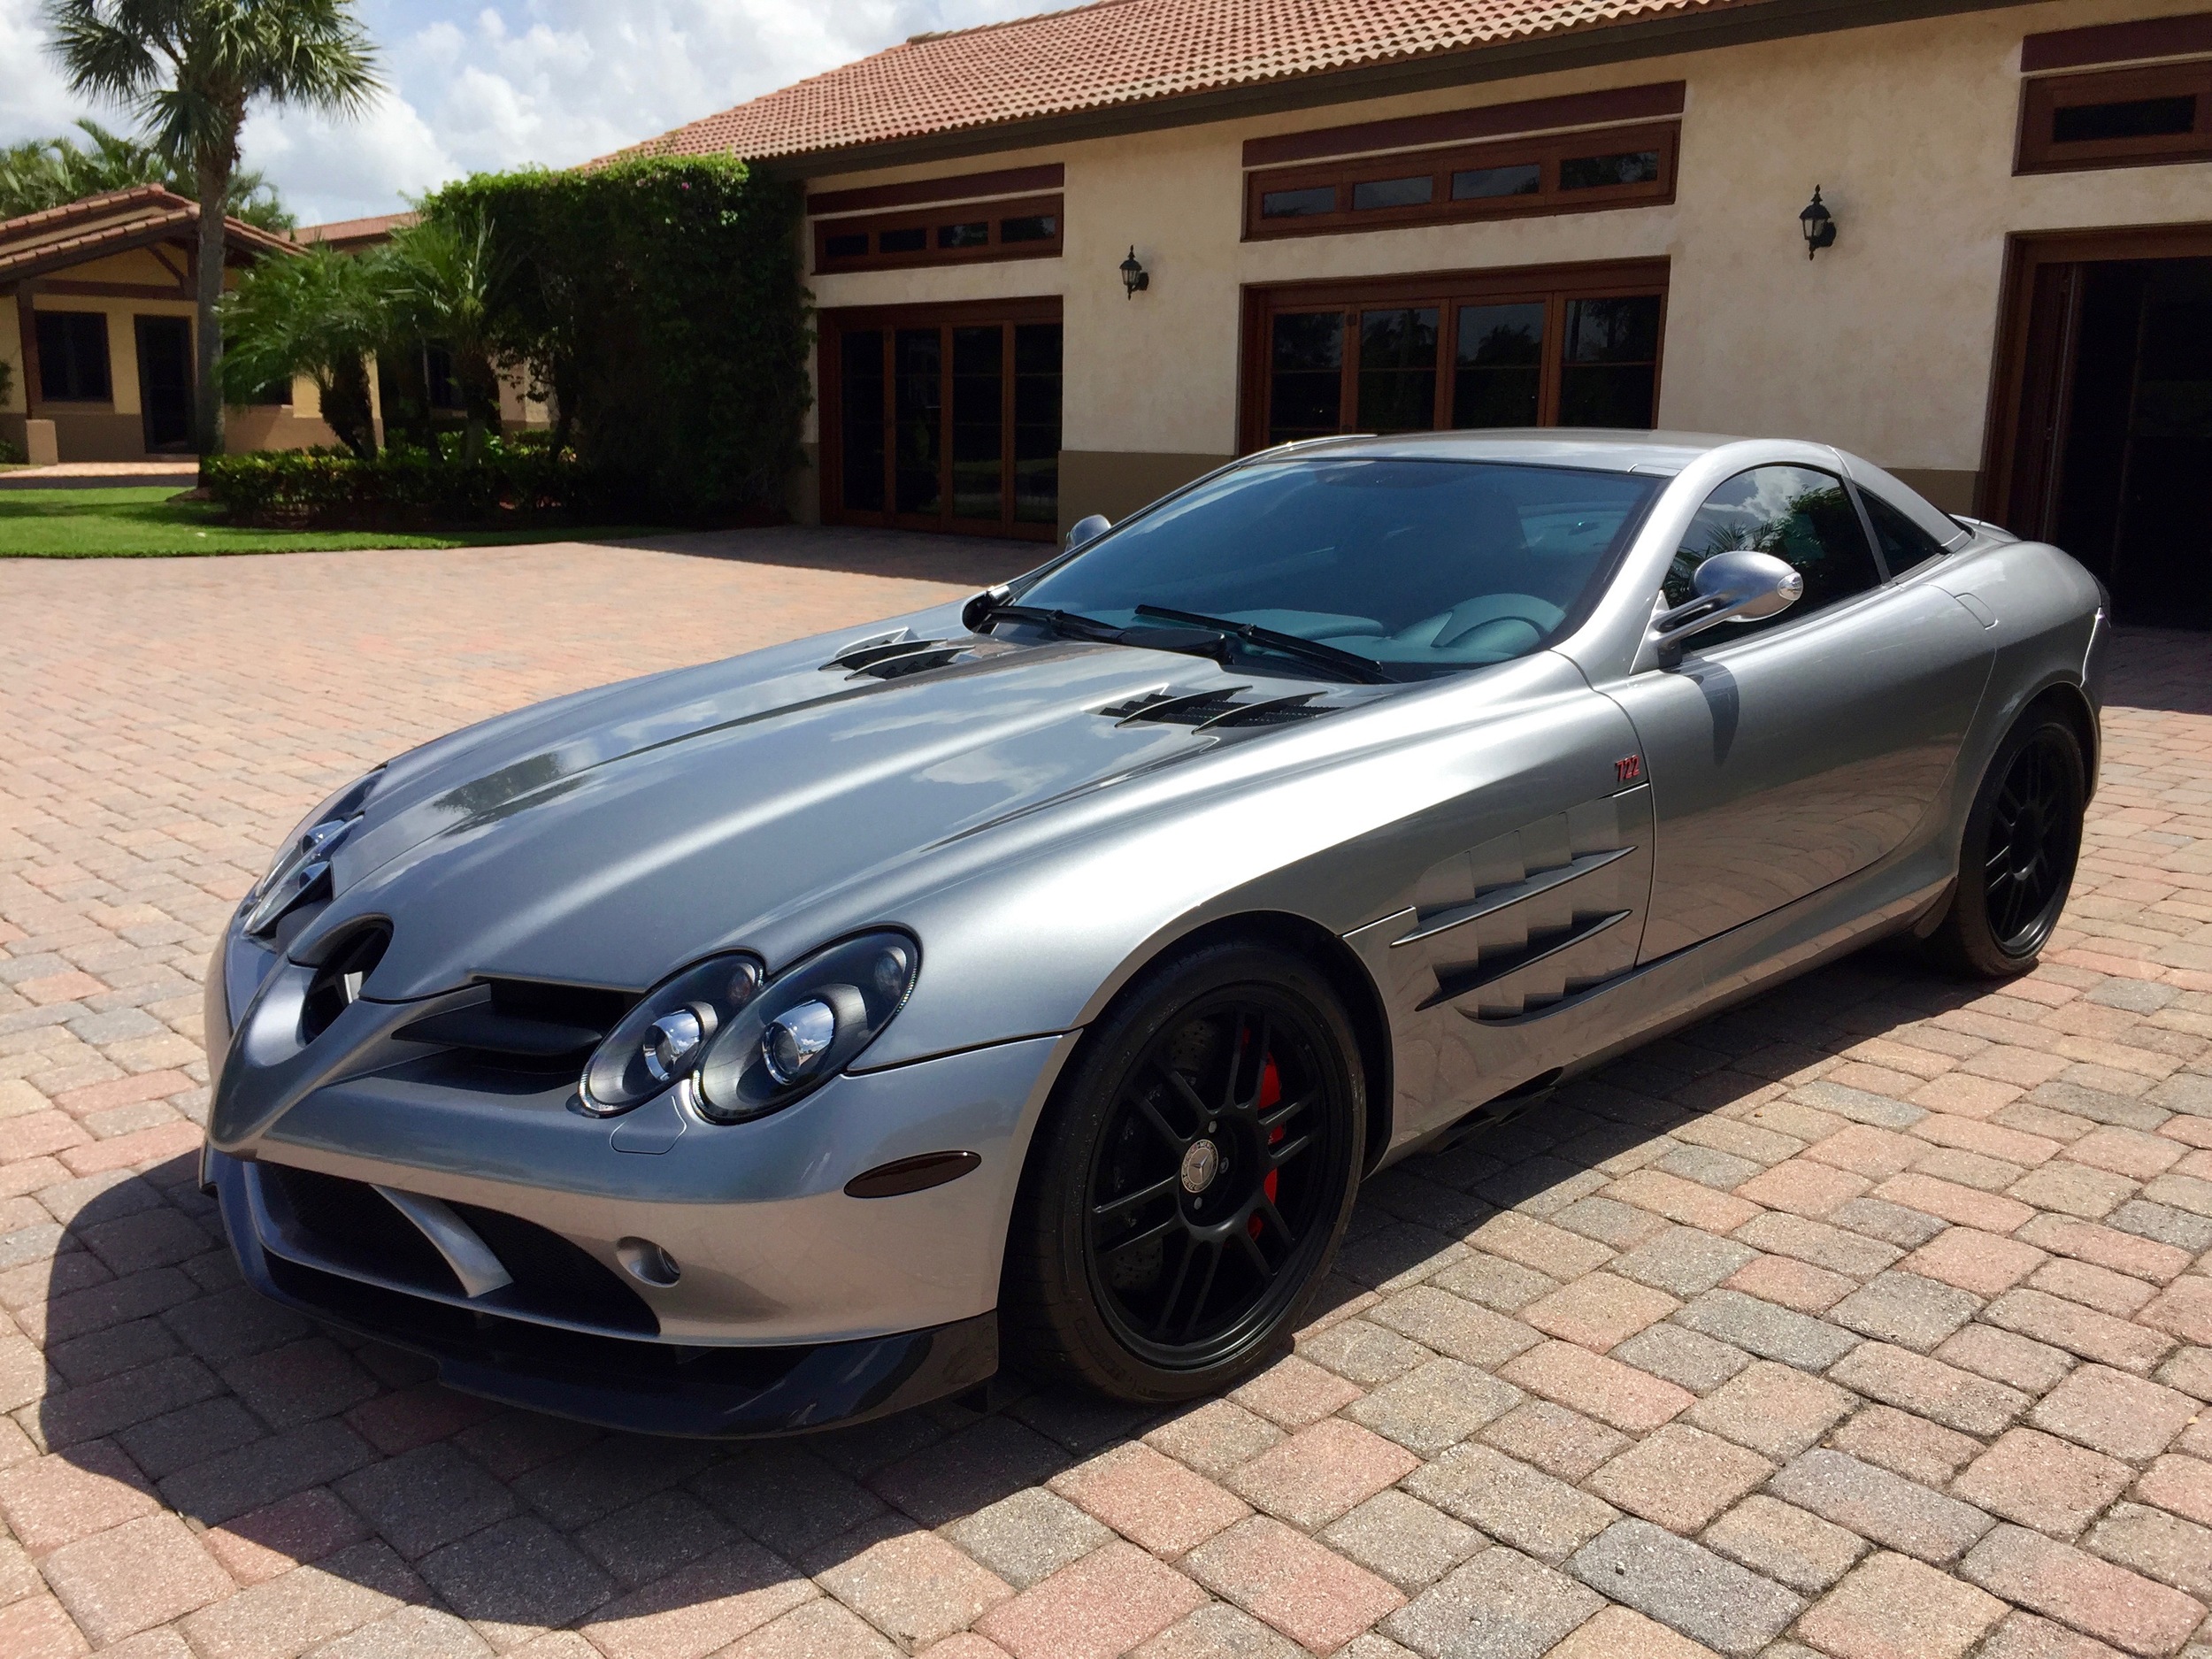 2007 Mercedes Benz Slr 722coupe For Sale The Car Experience